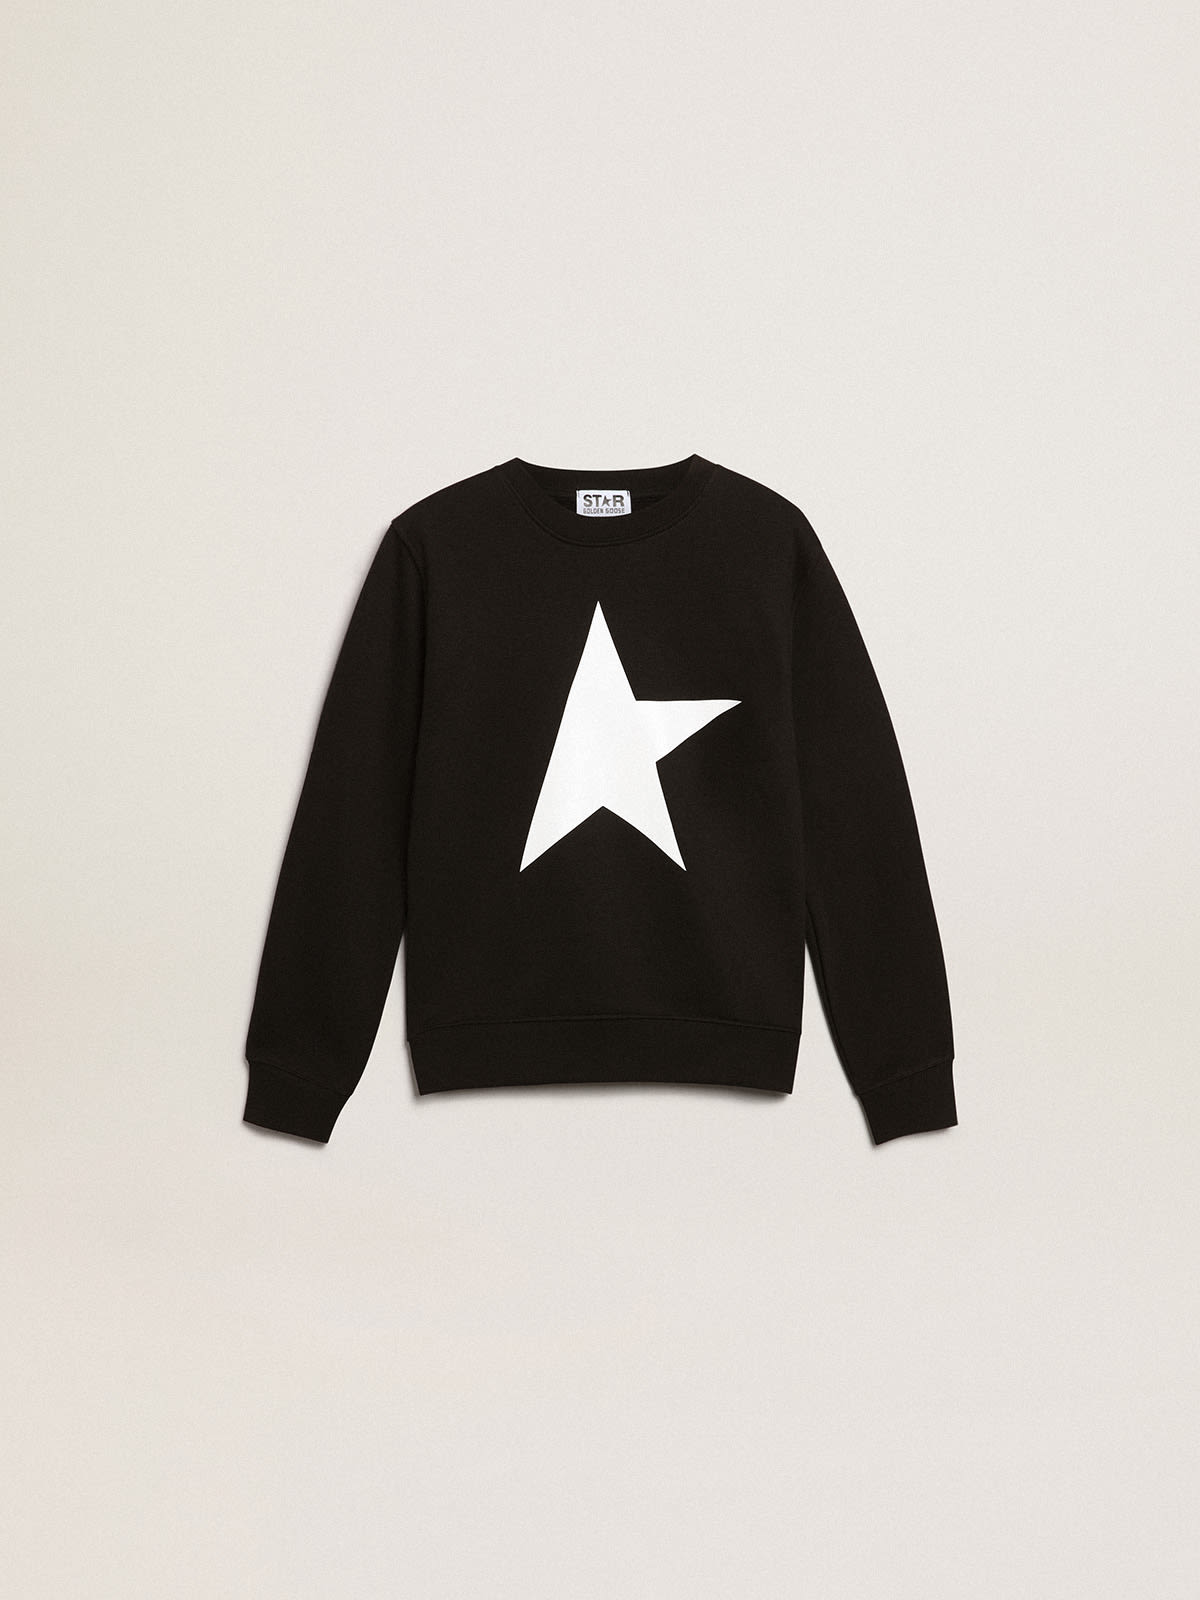 Golden Goose - Boys’ black sweatshirt with white maxi star on the front in 